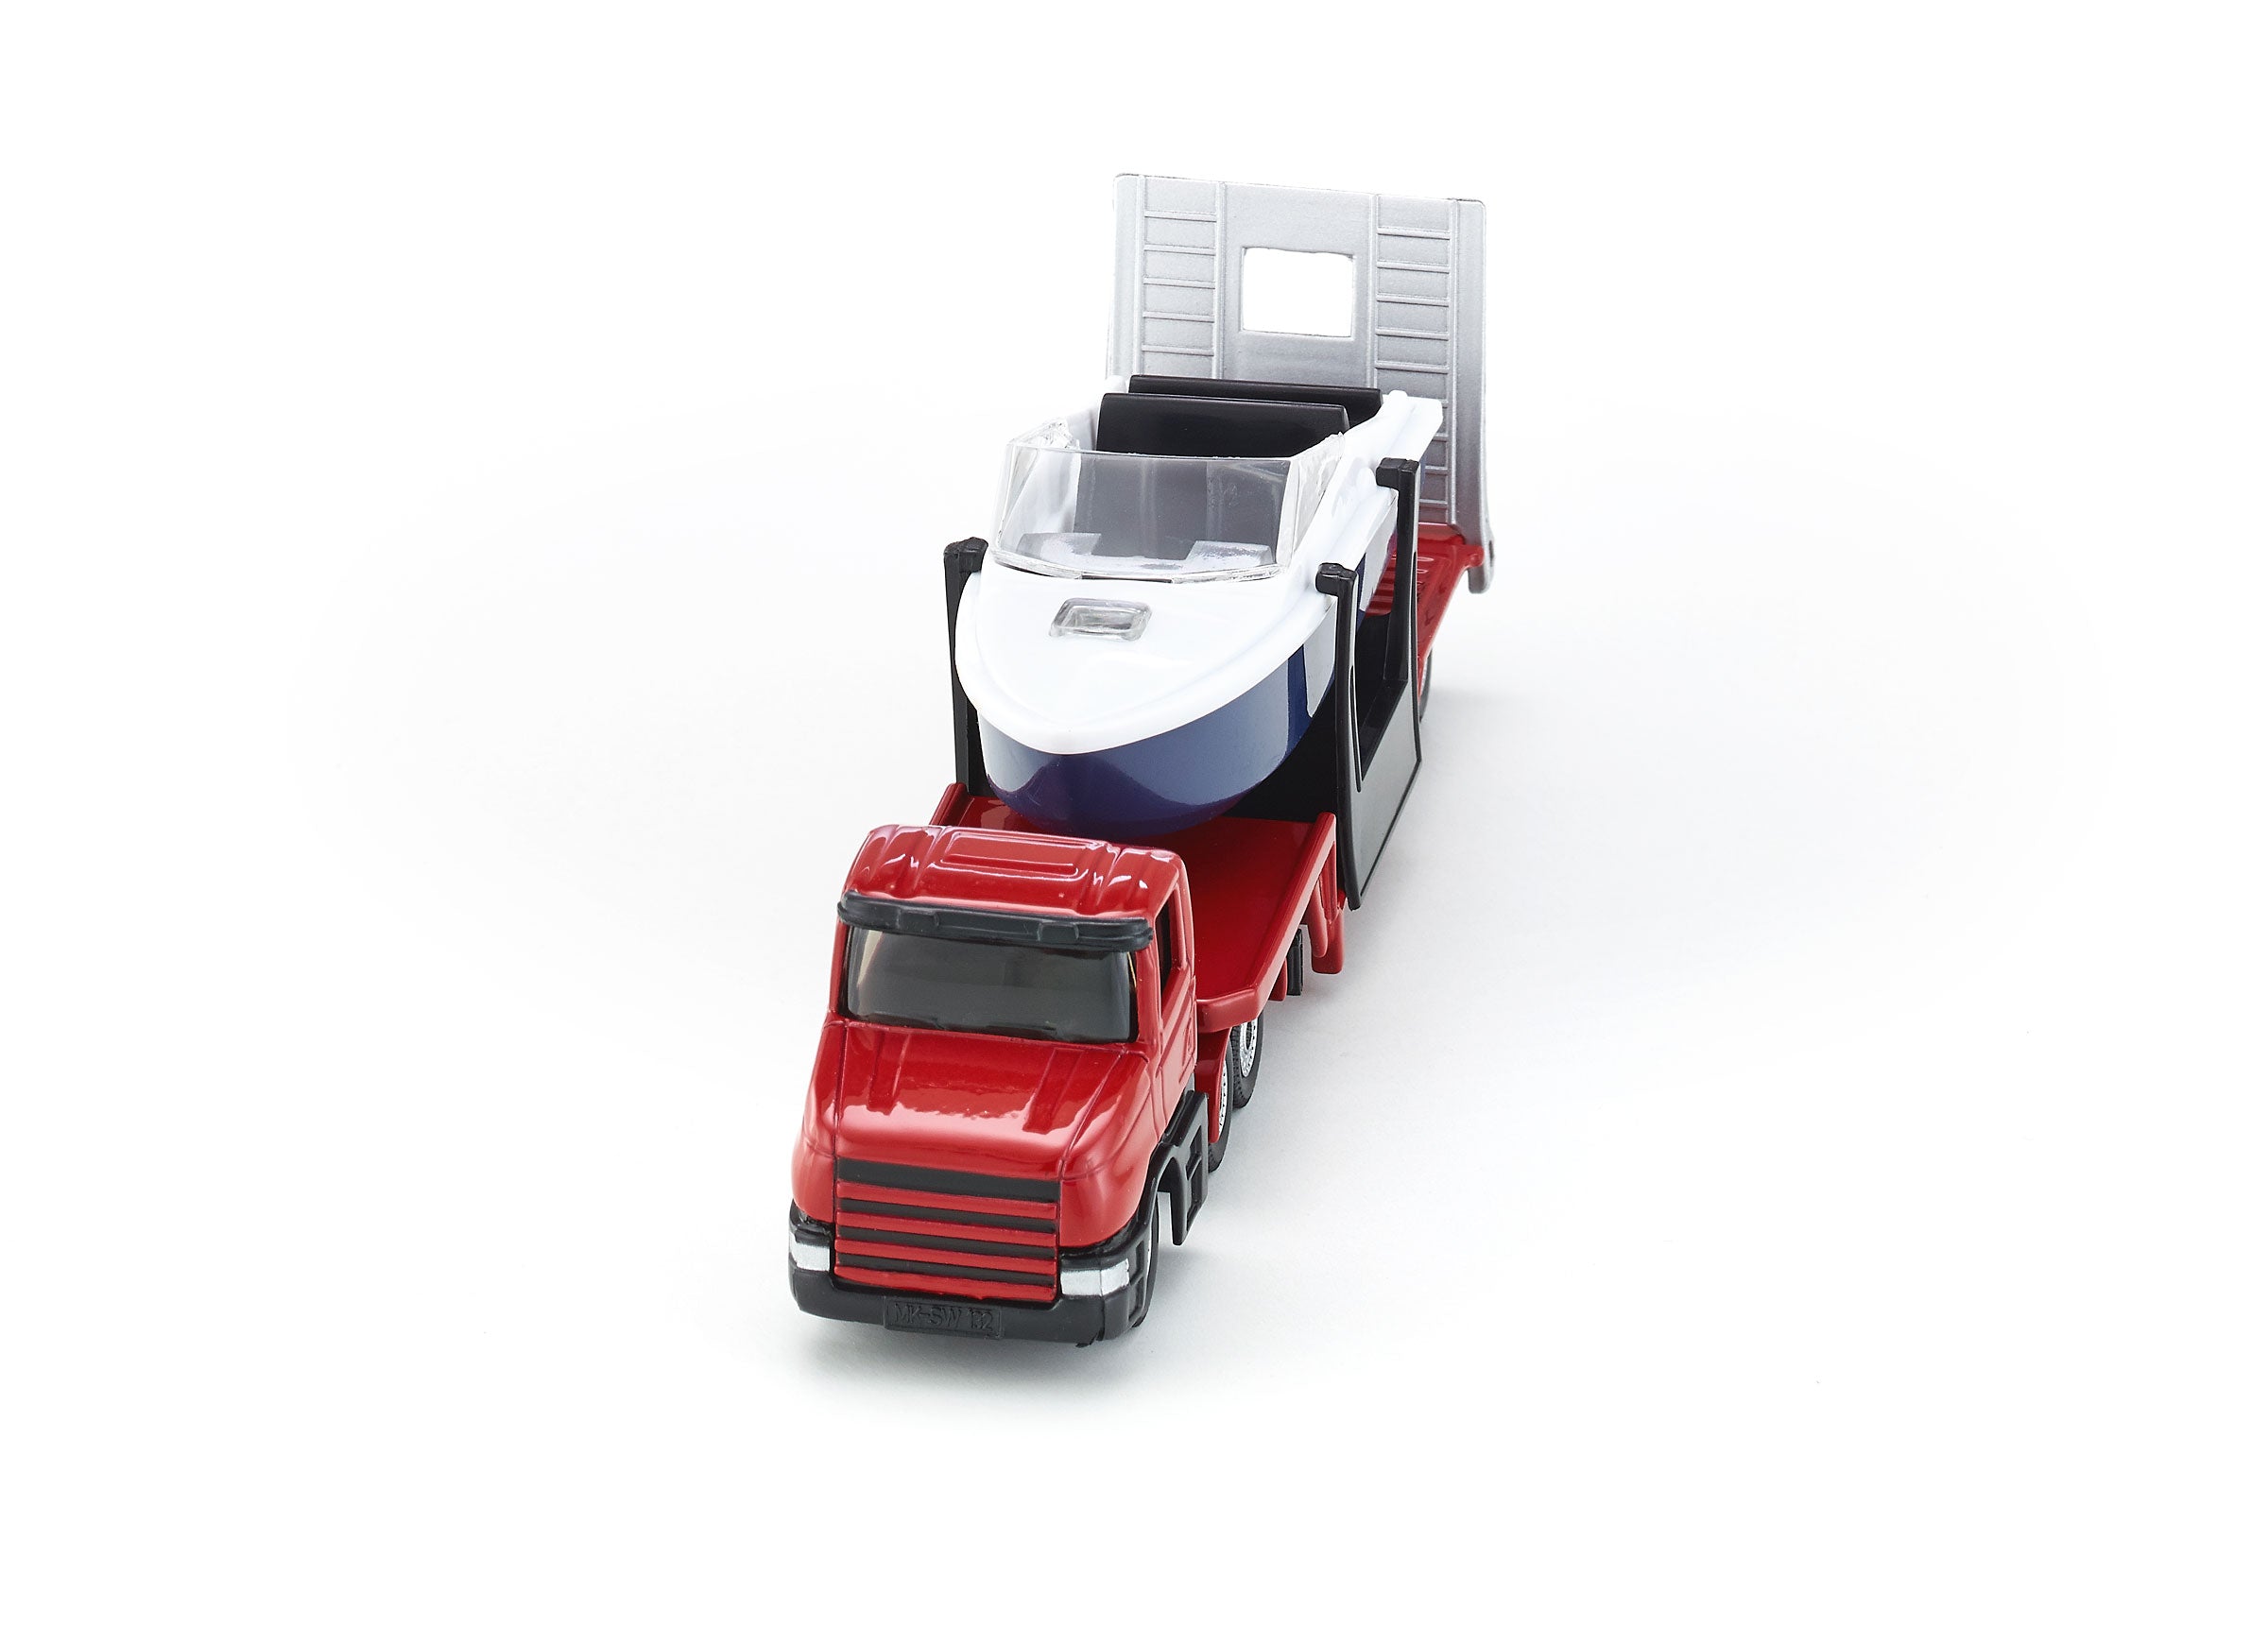 Siku 1:87 Low Loader With Speed Boat